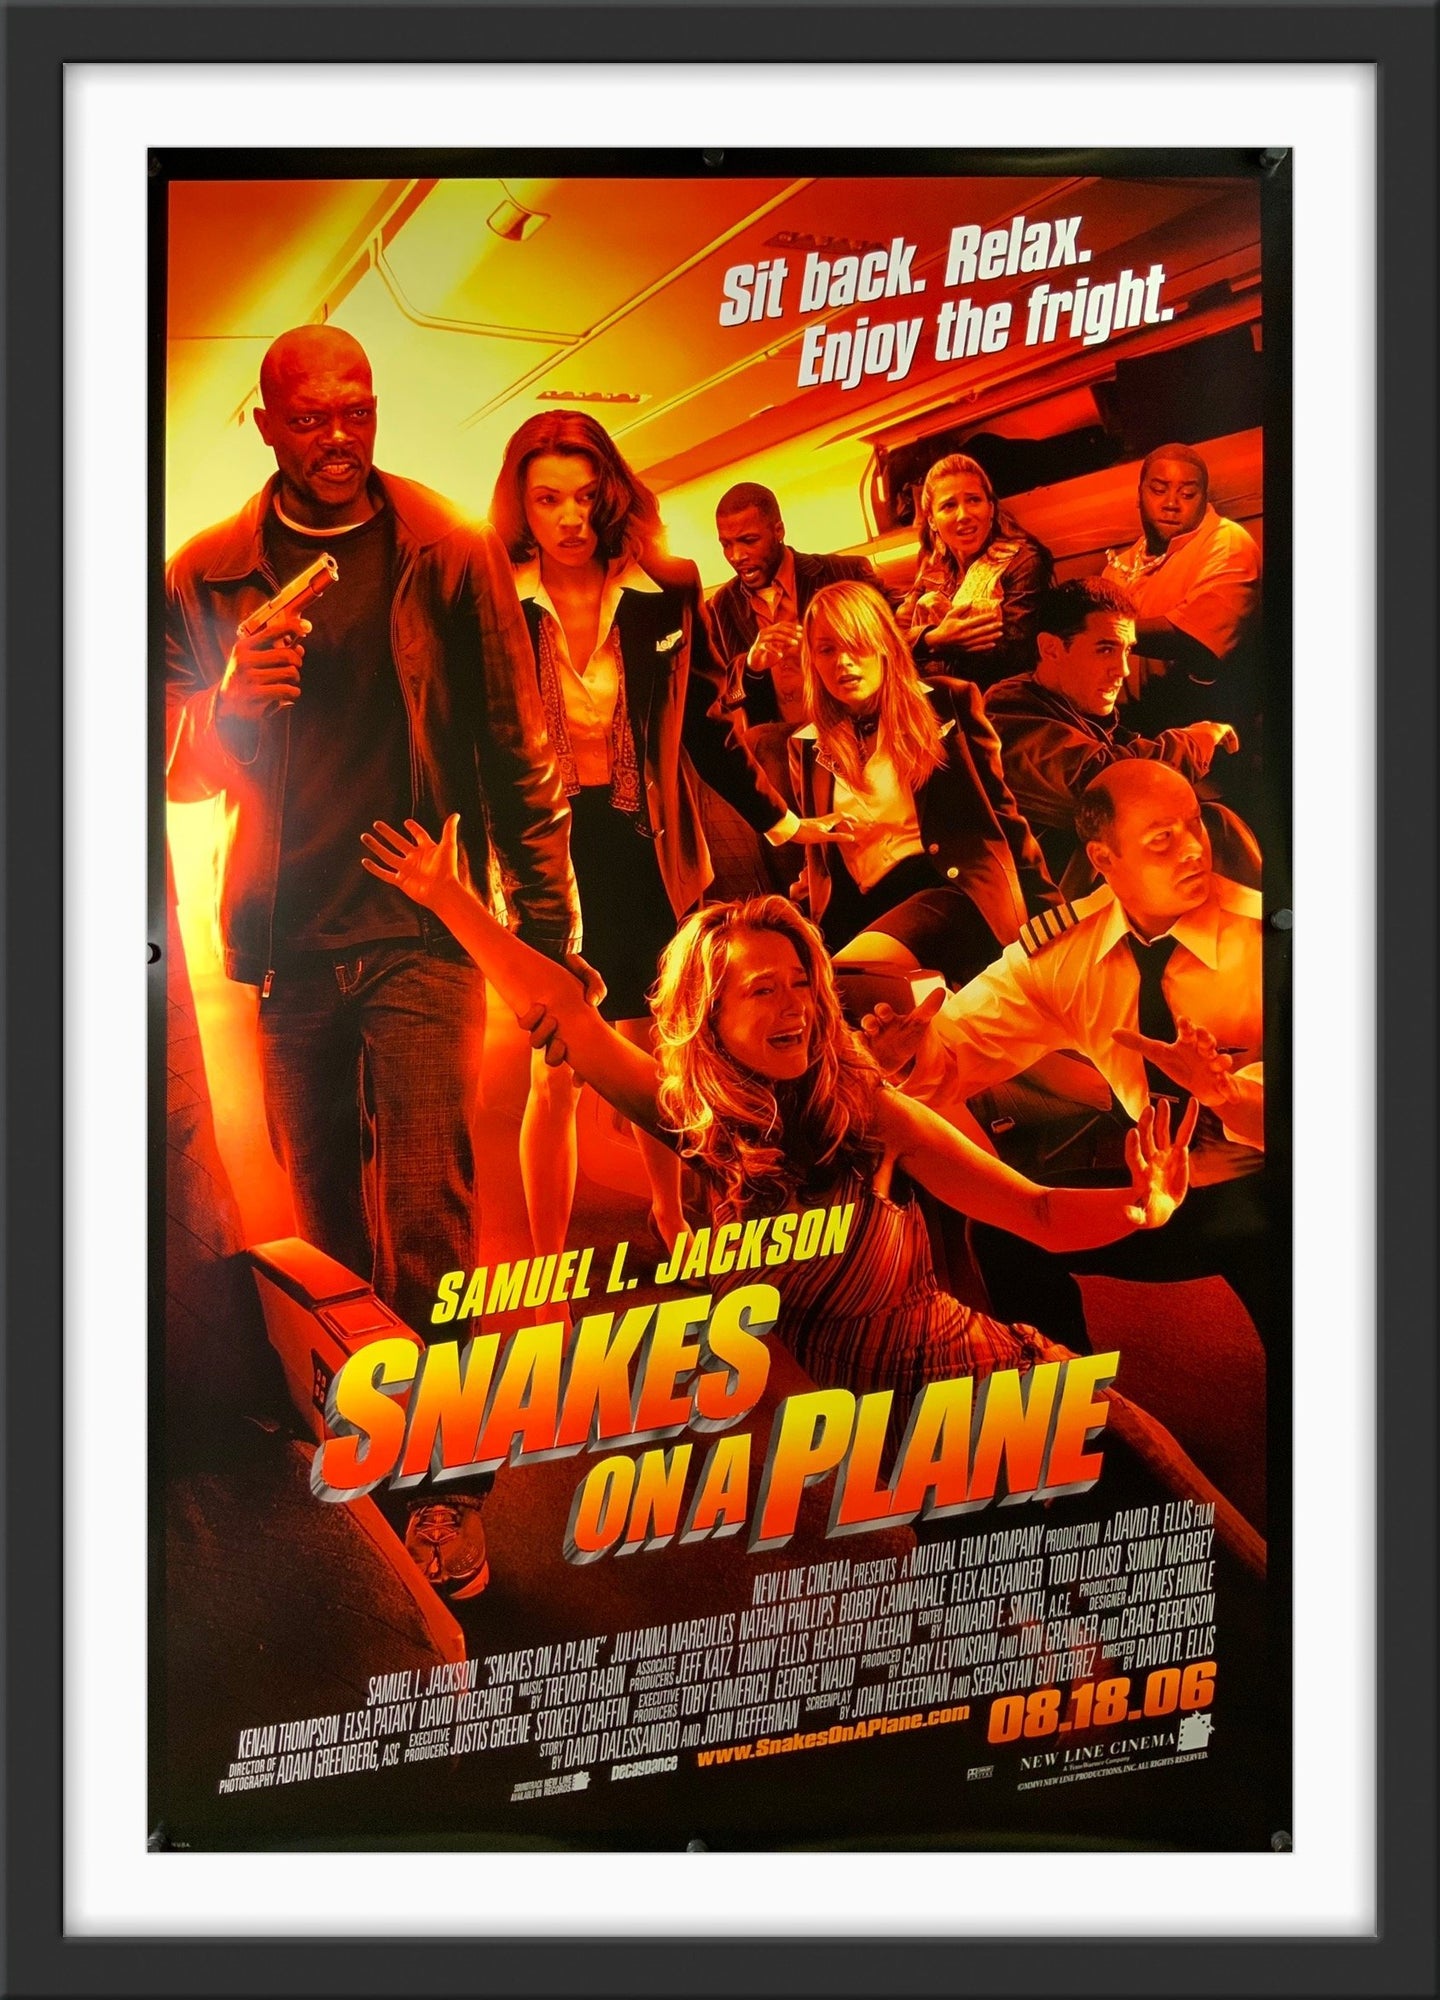 An original movie poster for the film Snakes On A Plane